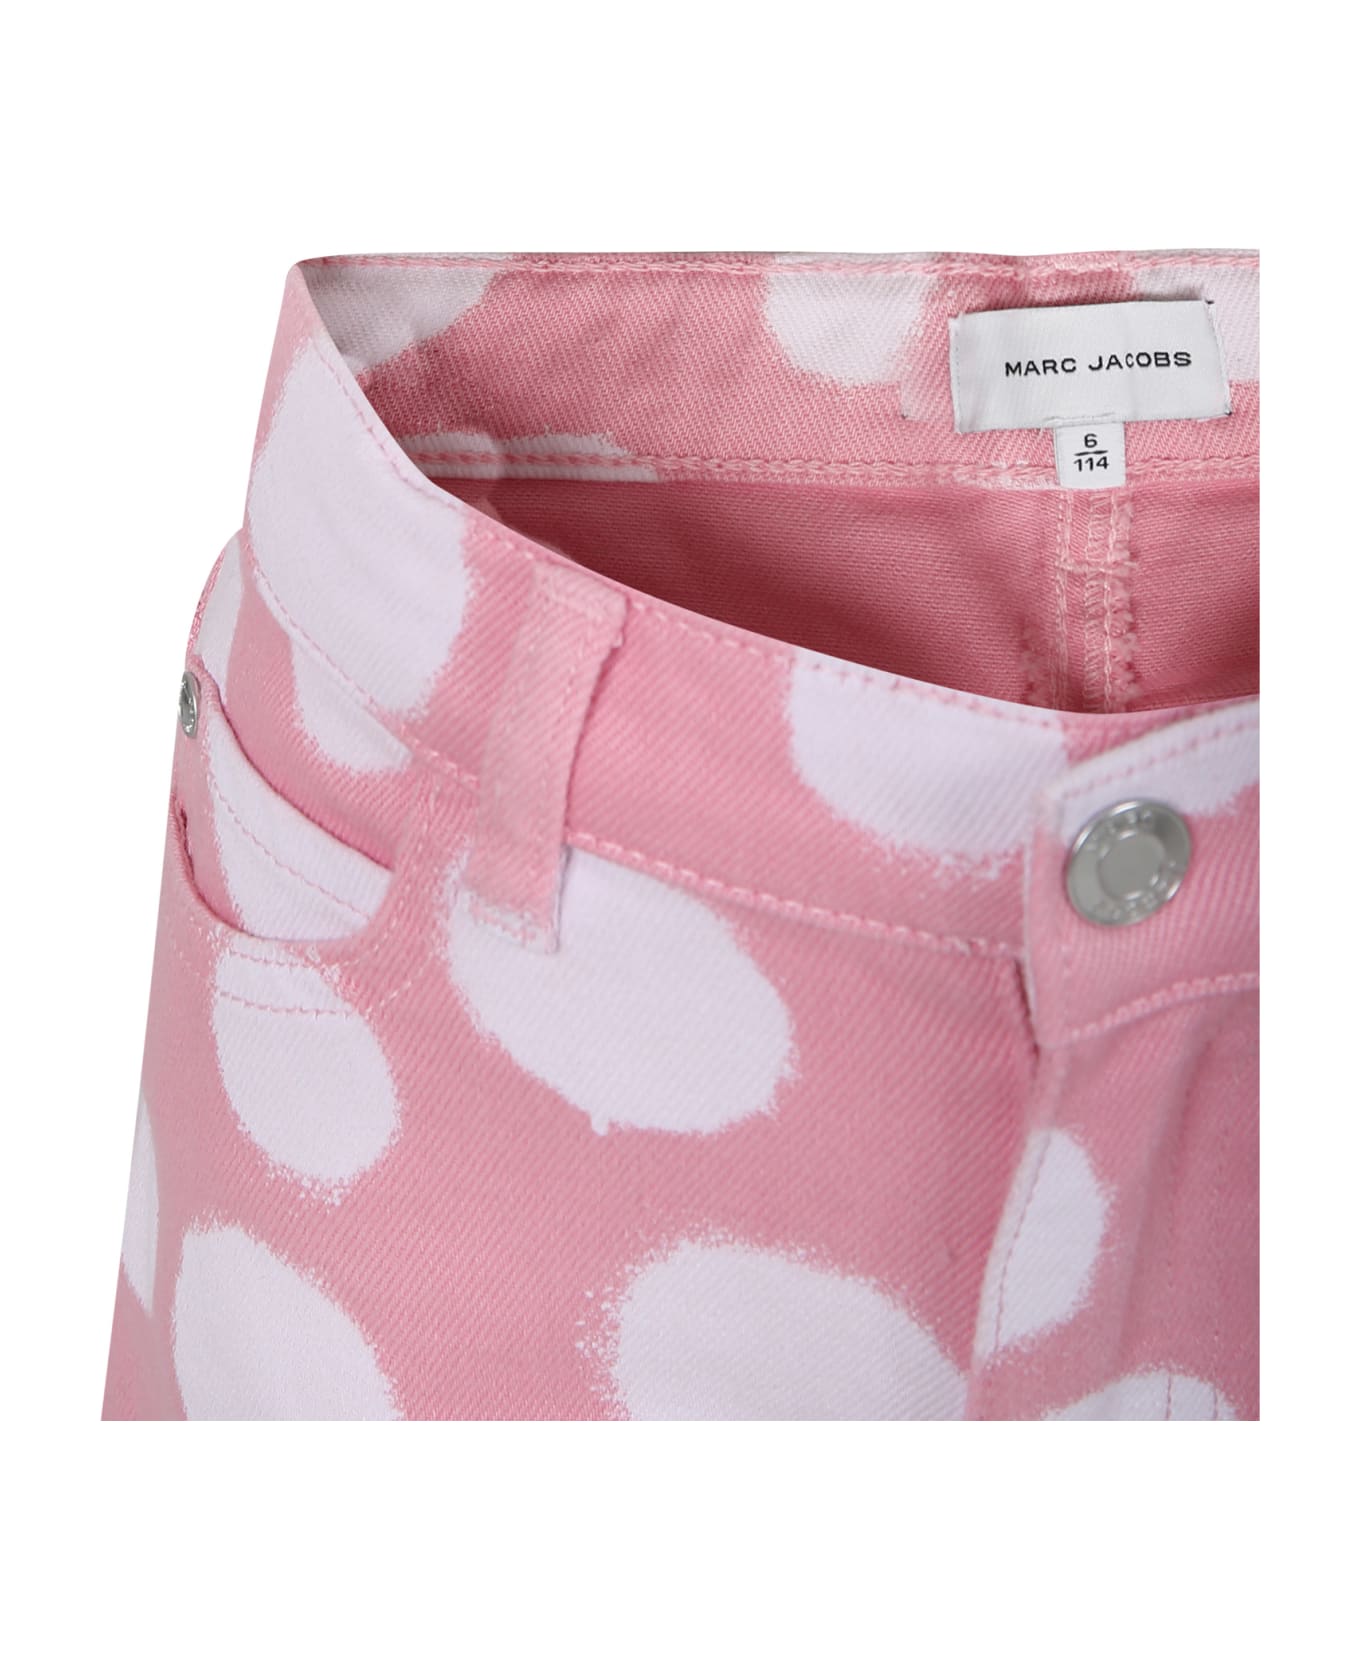 Marc Jacobs Pink Shorts For Girl With All-over Polka Dots - Pink